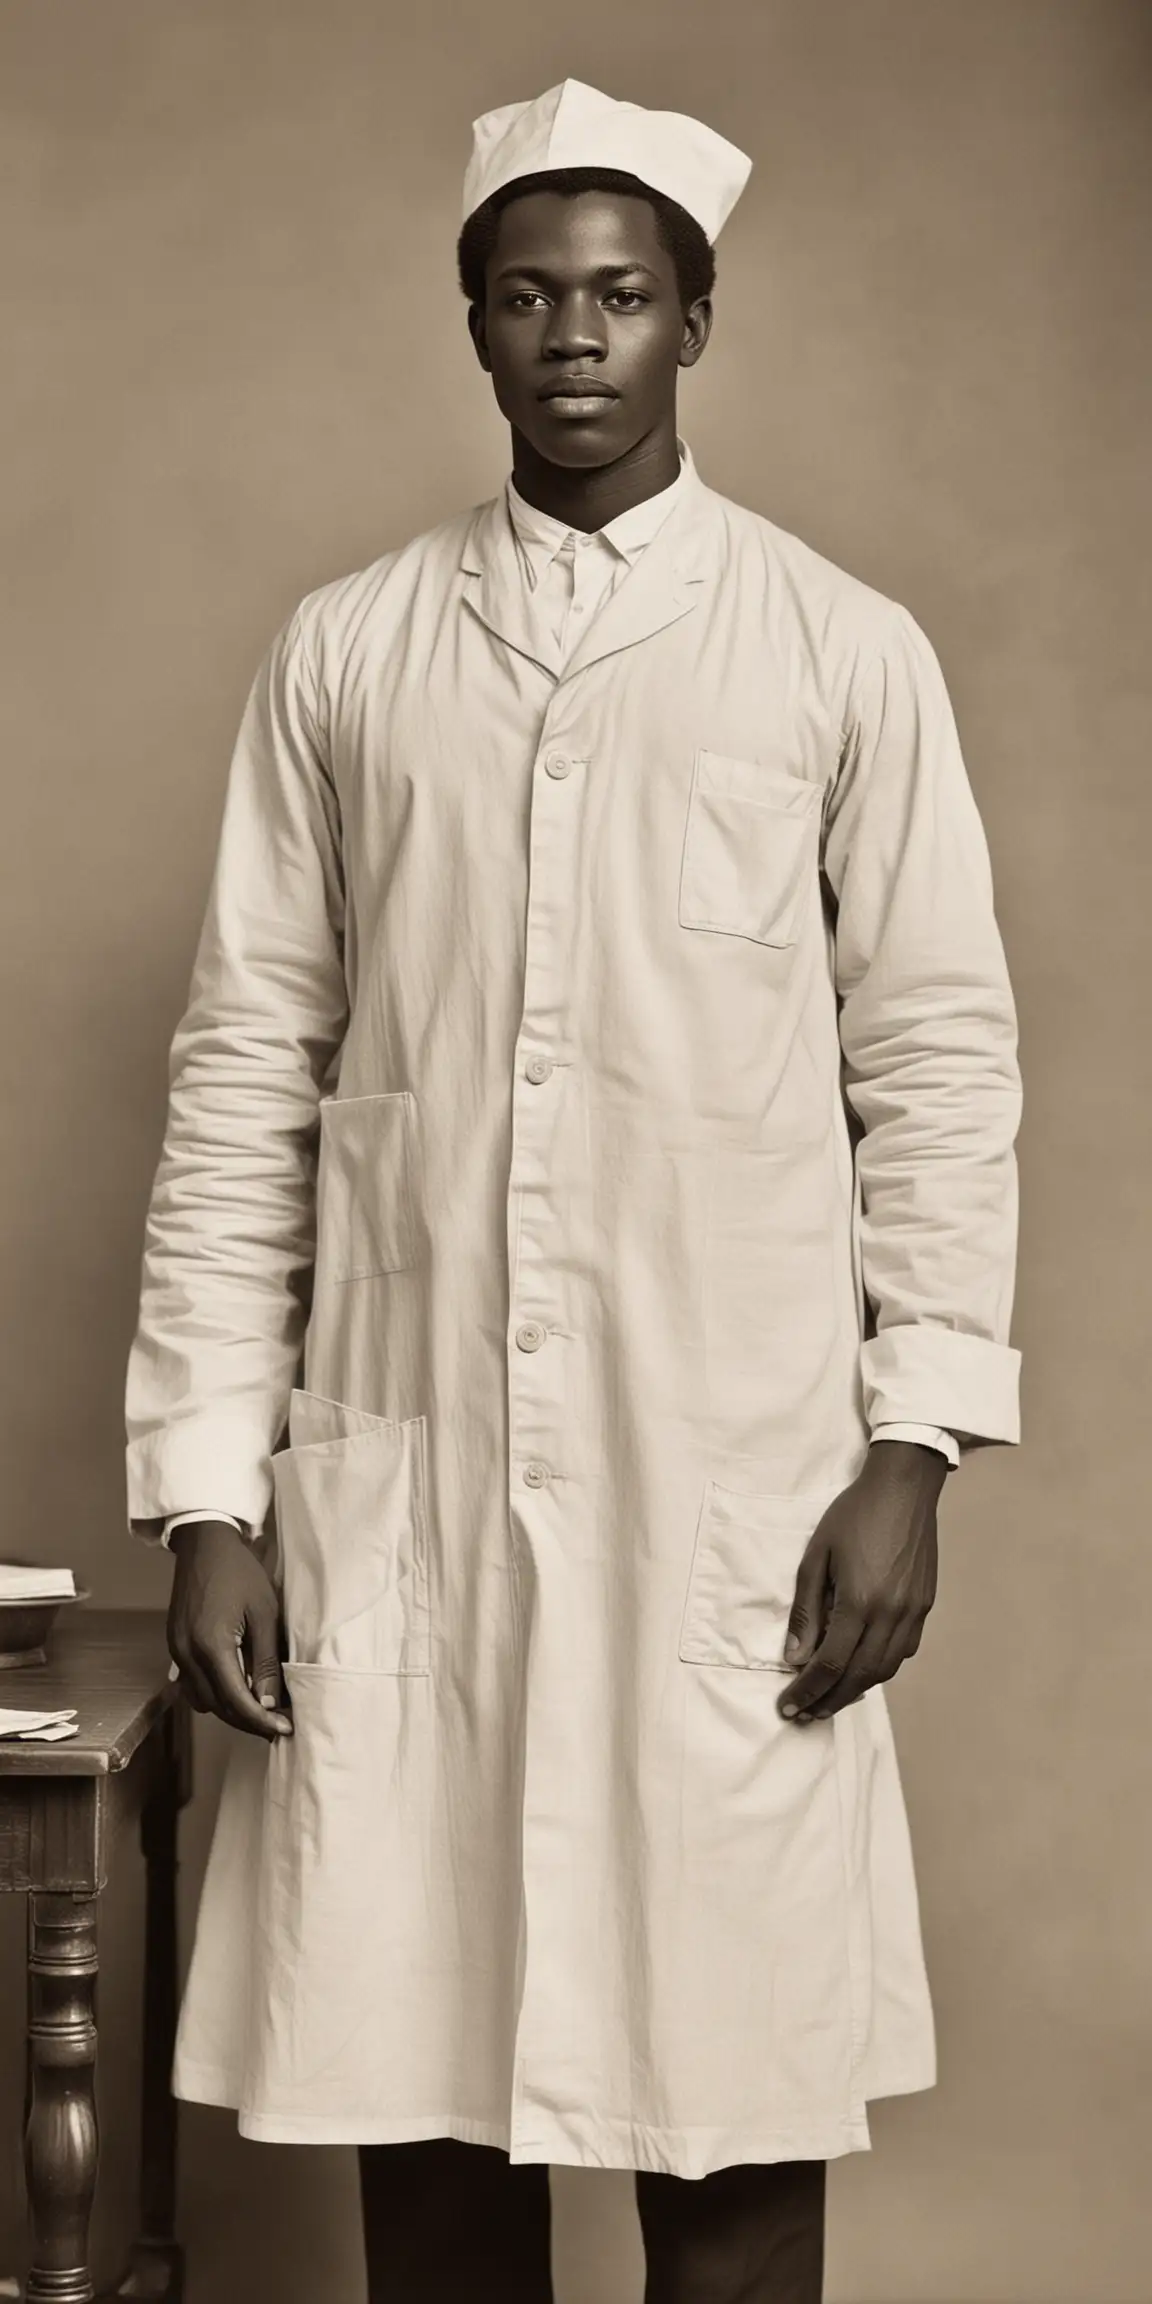 African-American male nurse,  during the small pox epidemic, 1882